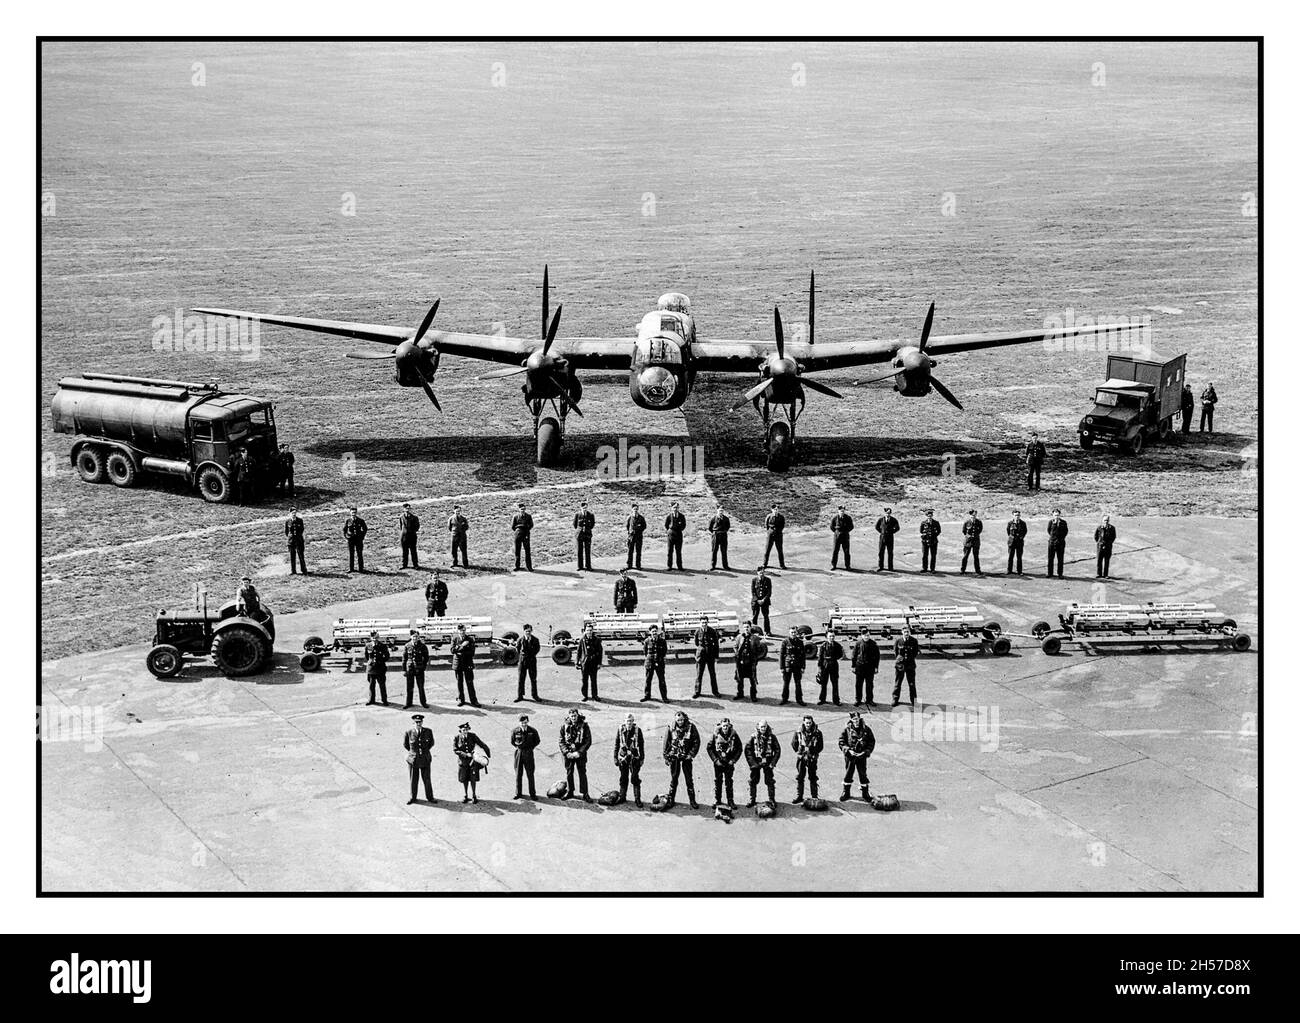 LANCASTER BOMBER SERVICE PERSONNEL WW2 all RAF personnel required to keep an Avro Lancaster of RAF Bomber Command flying on war operations, taken at Scampton, Lincolnshire, 11 June 1942. Remarkable record of the various people and duties required during World War II to keep aircraft airborne and in vital brave airborne action against Nazi Germany Stock Photo